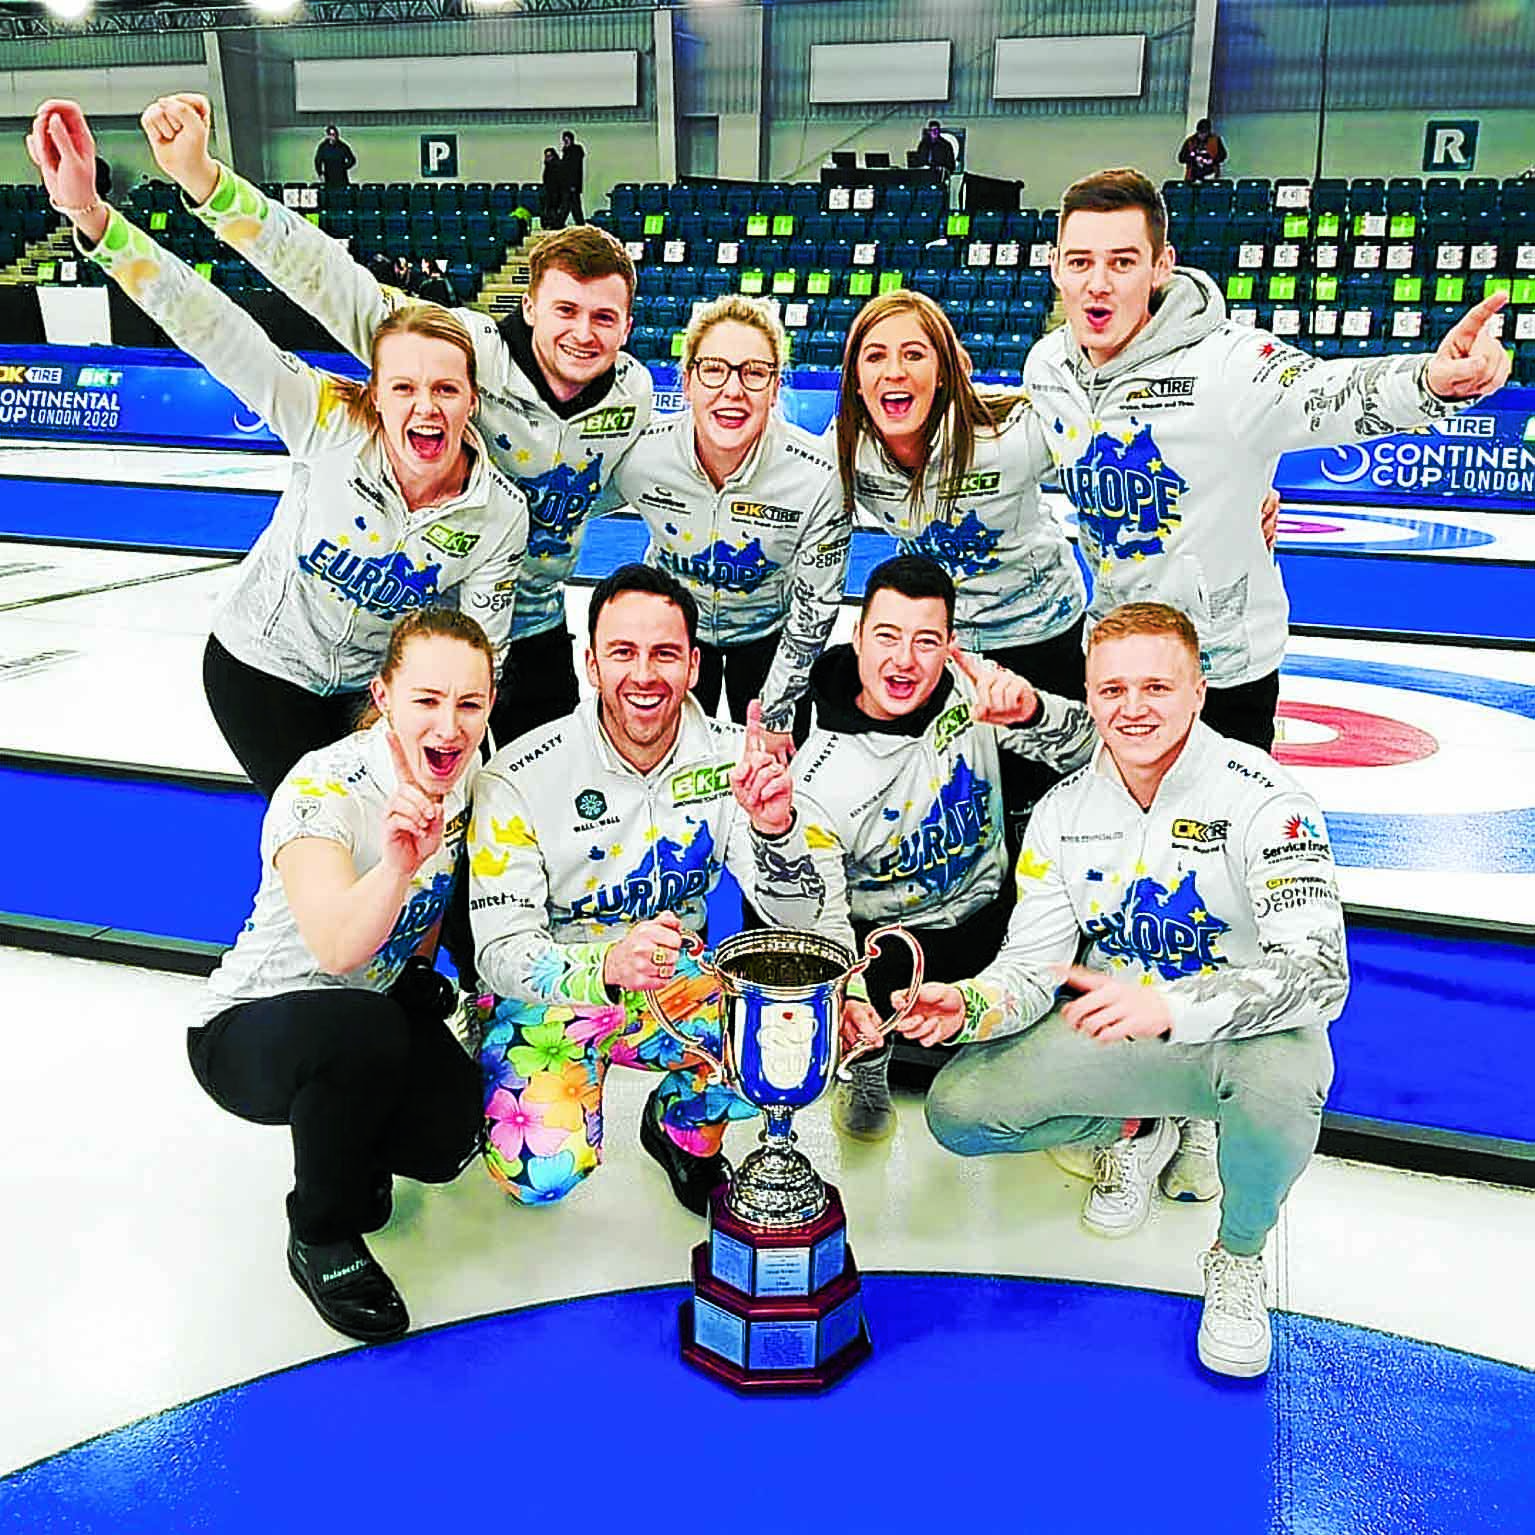 Victory for Team Europe